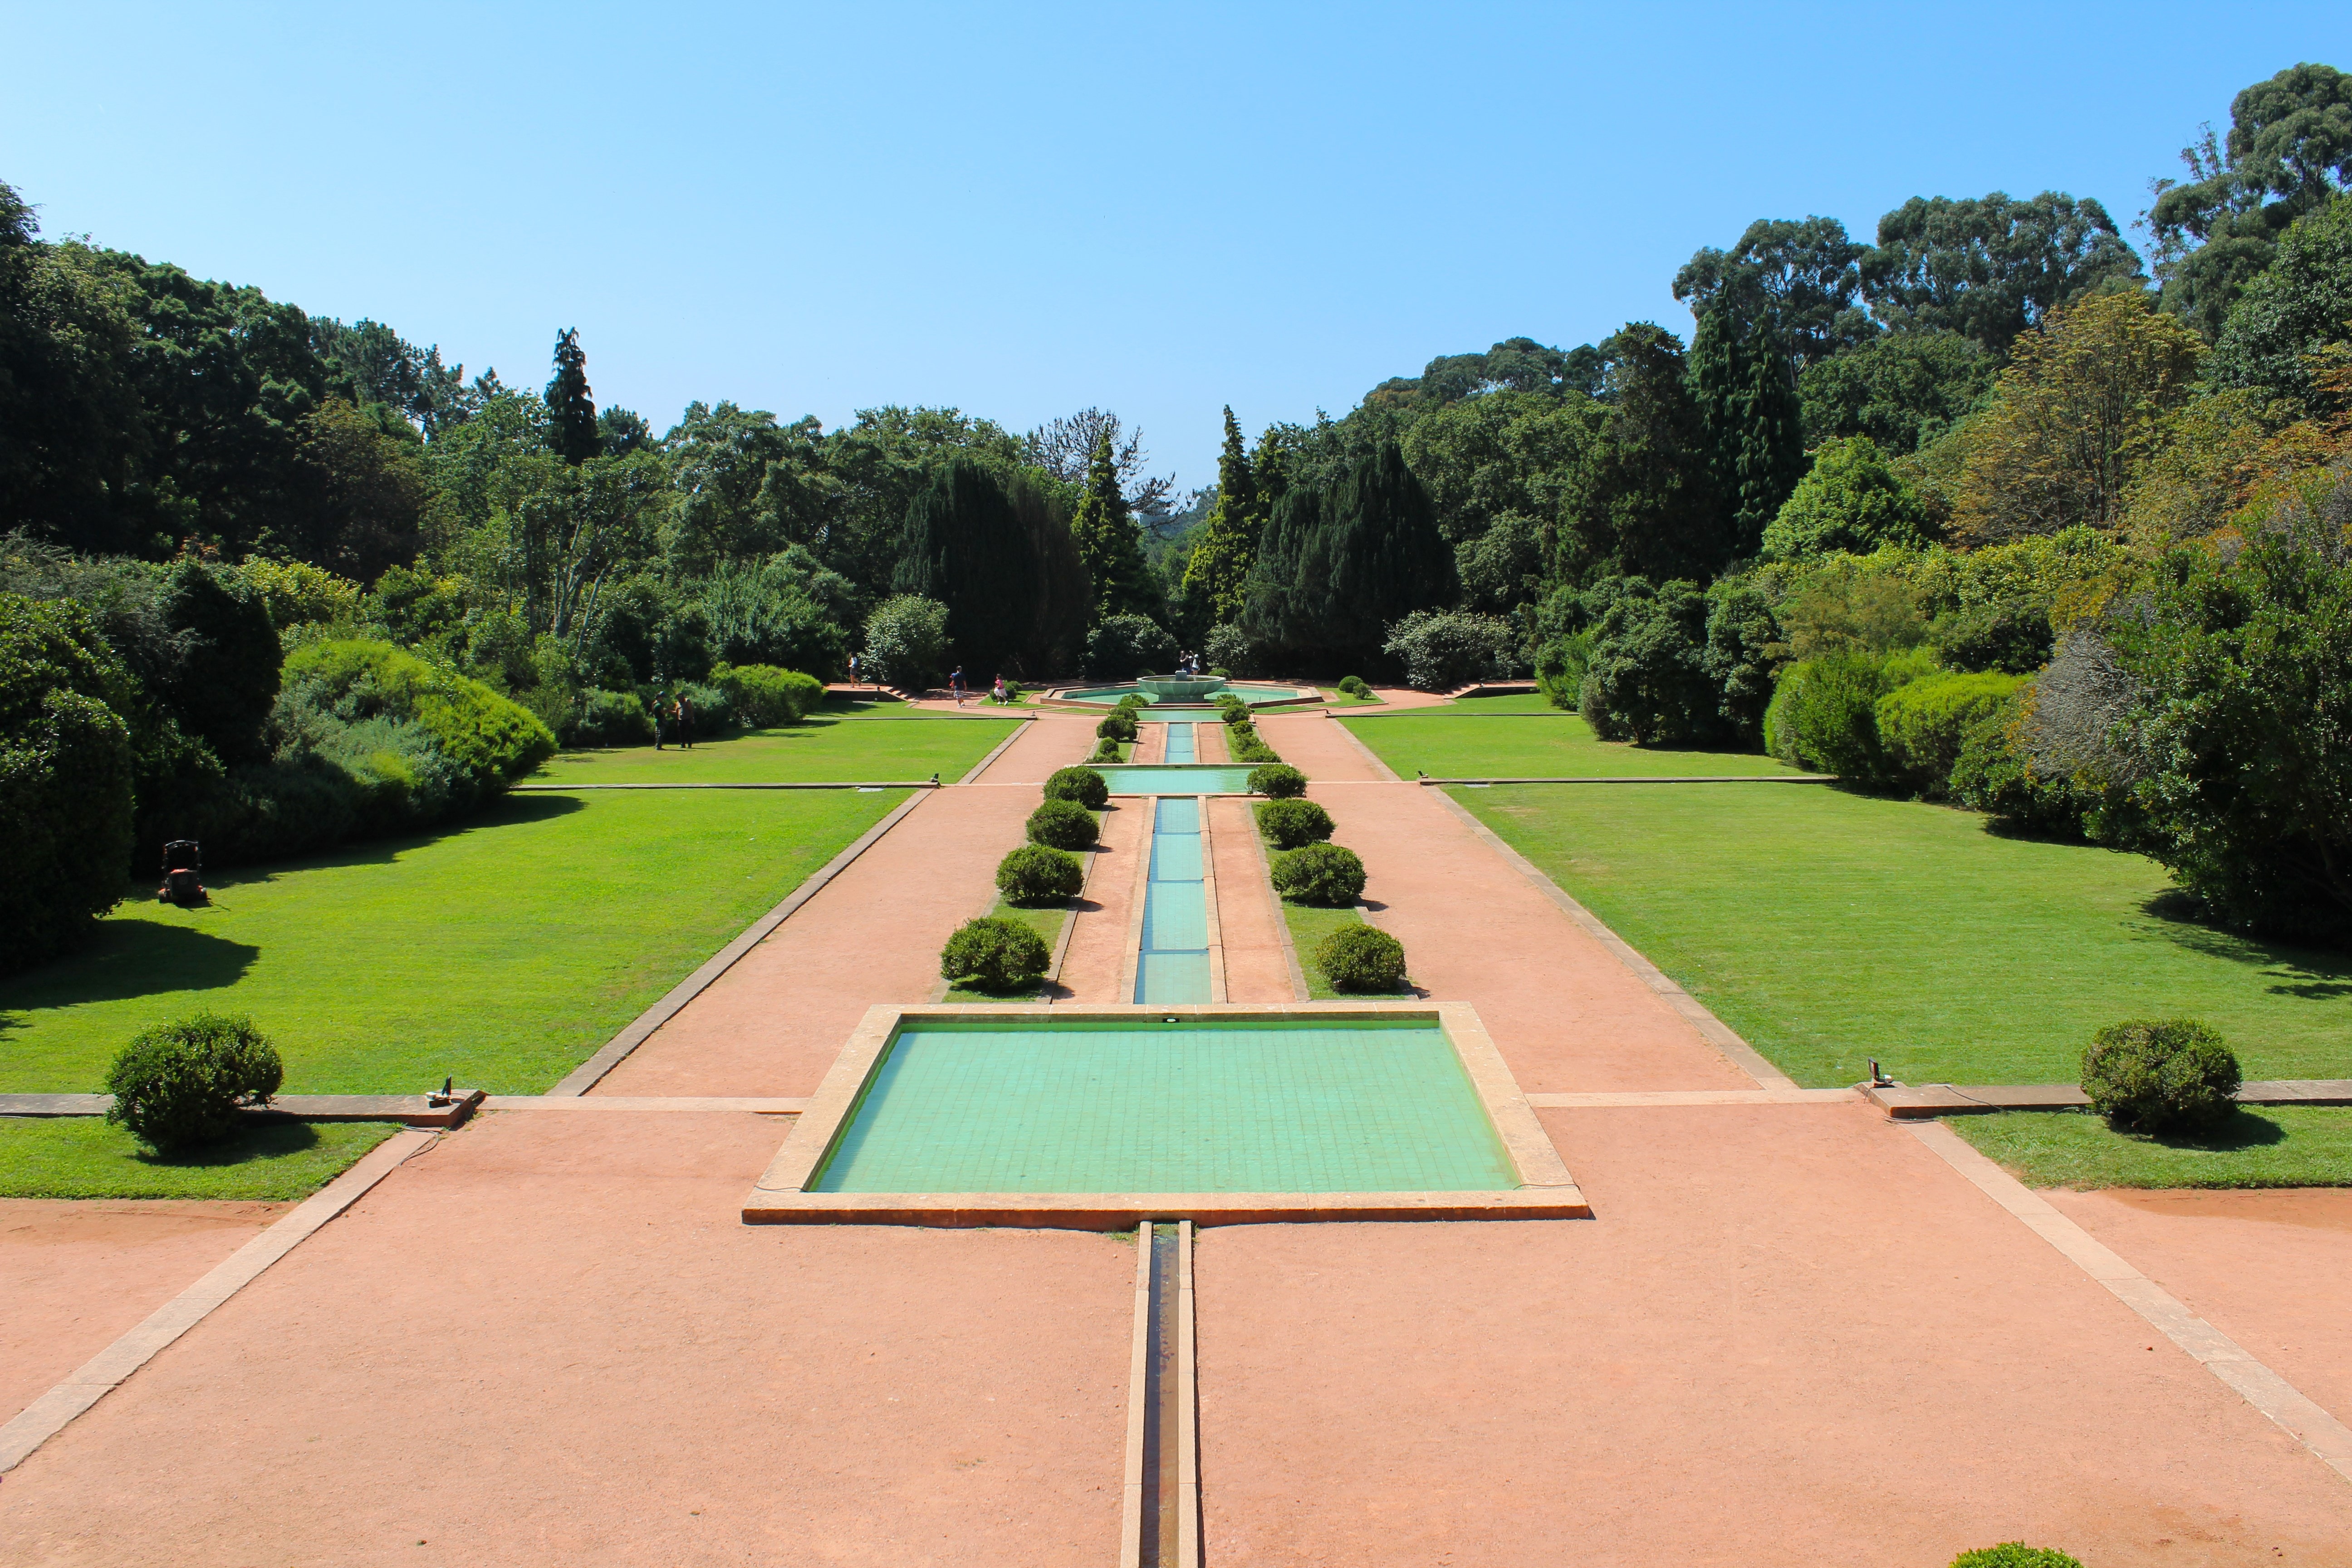 Photograph of the Serralves Foundation in Porto, Portugal, highlighting the modern and minimalist architectural design of the museum and its beautiful surrounding gardens